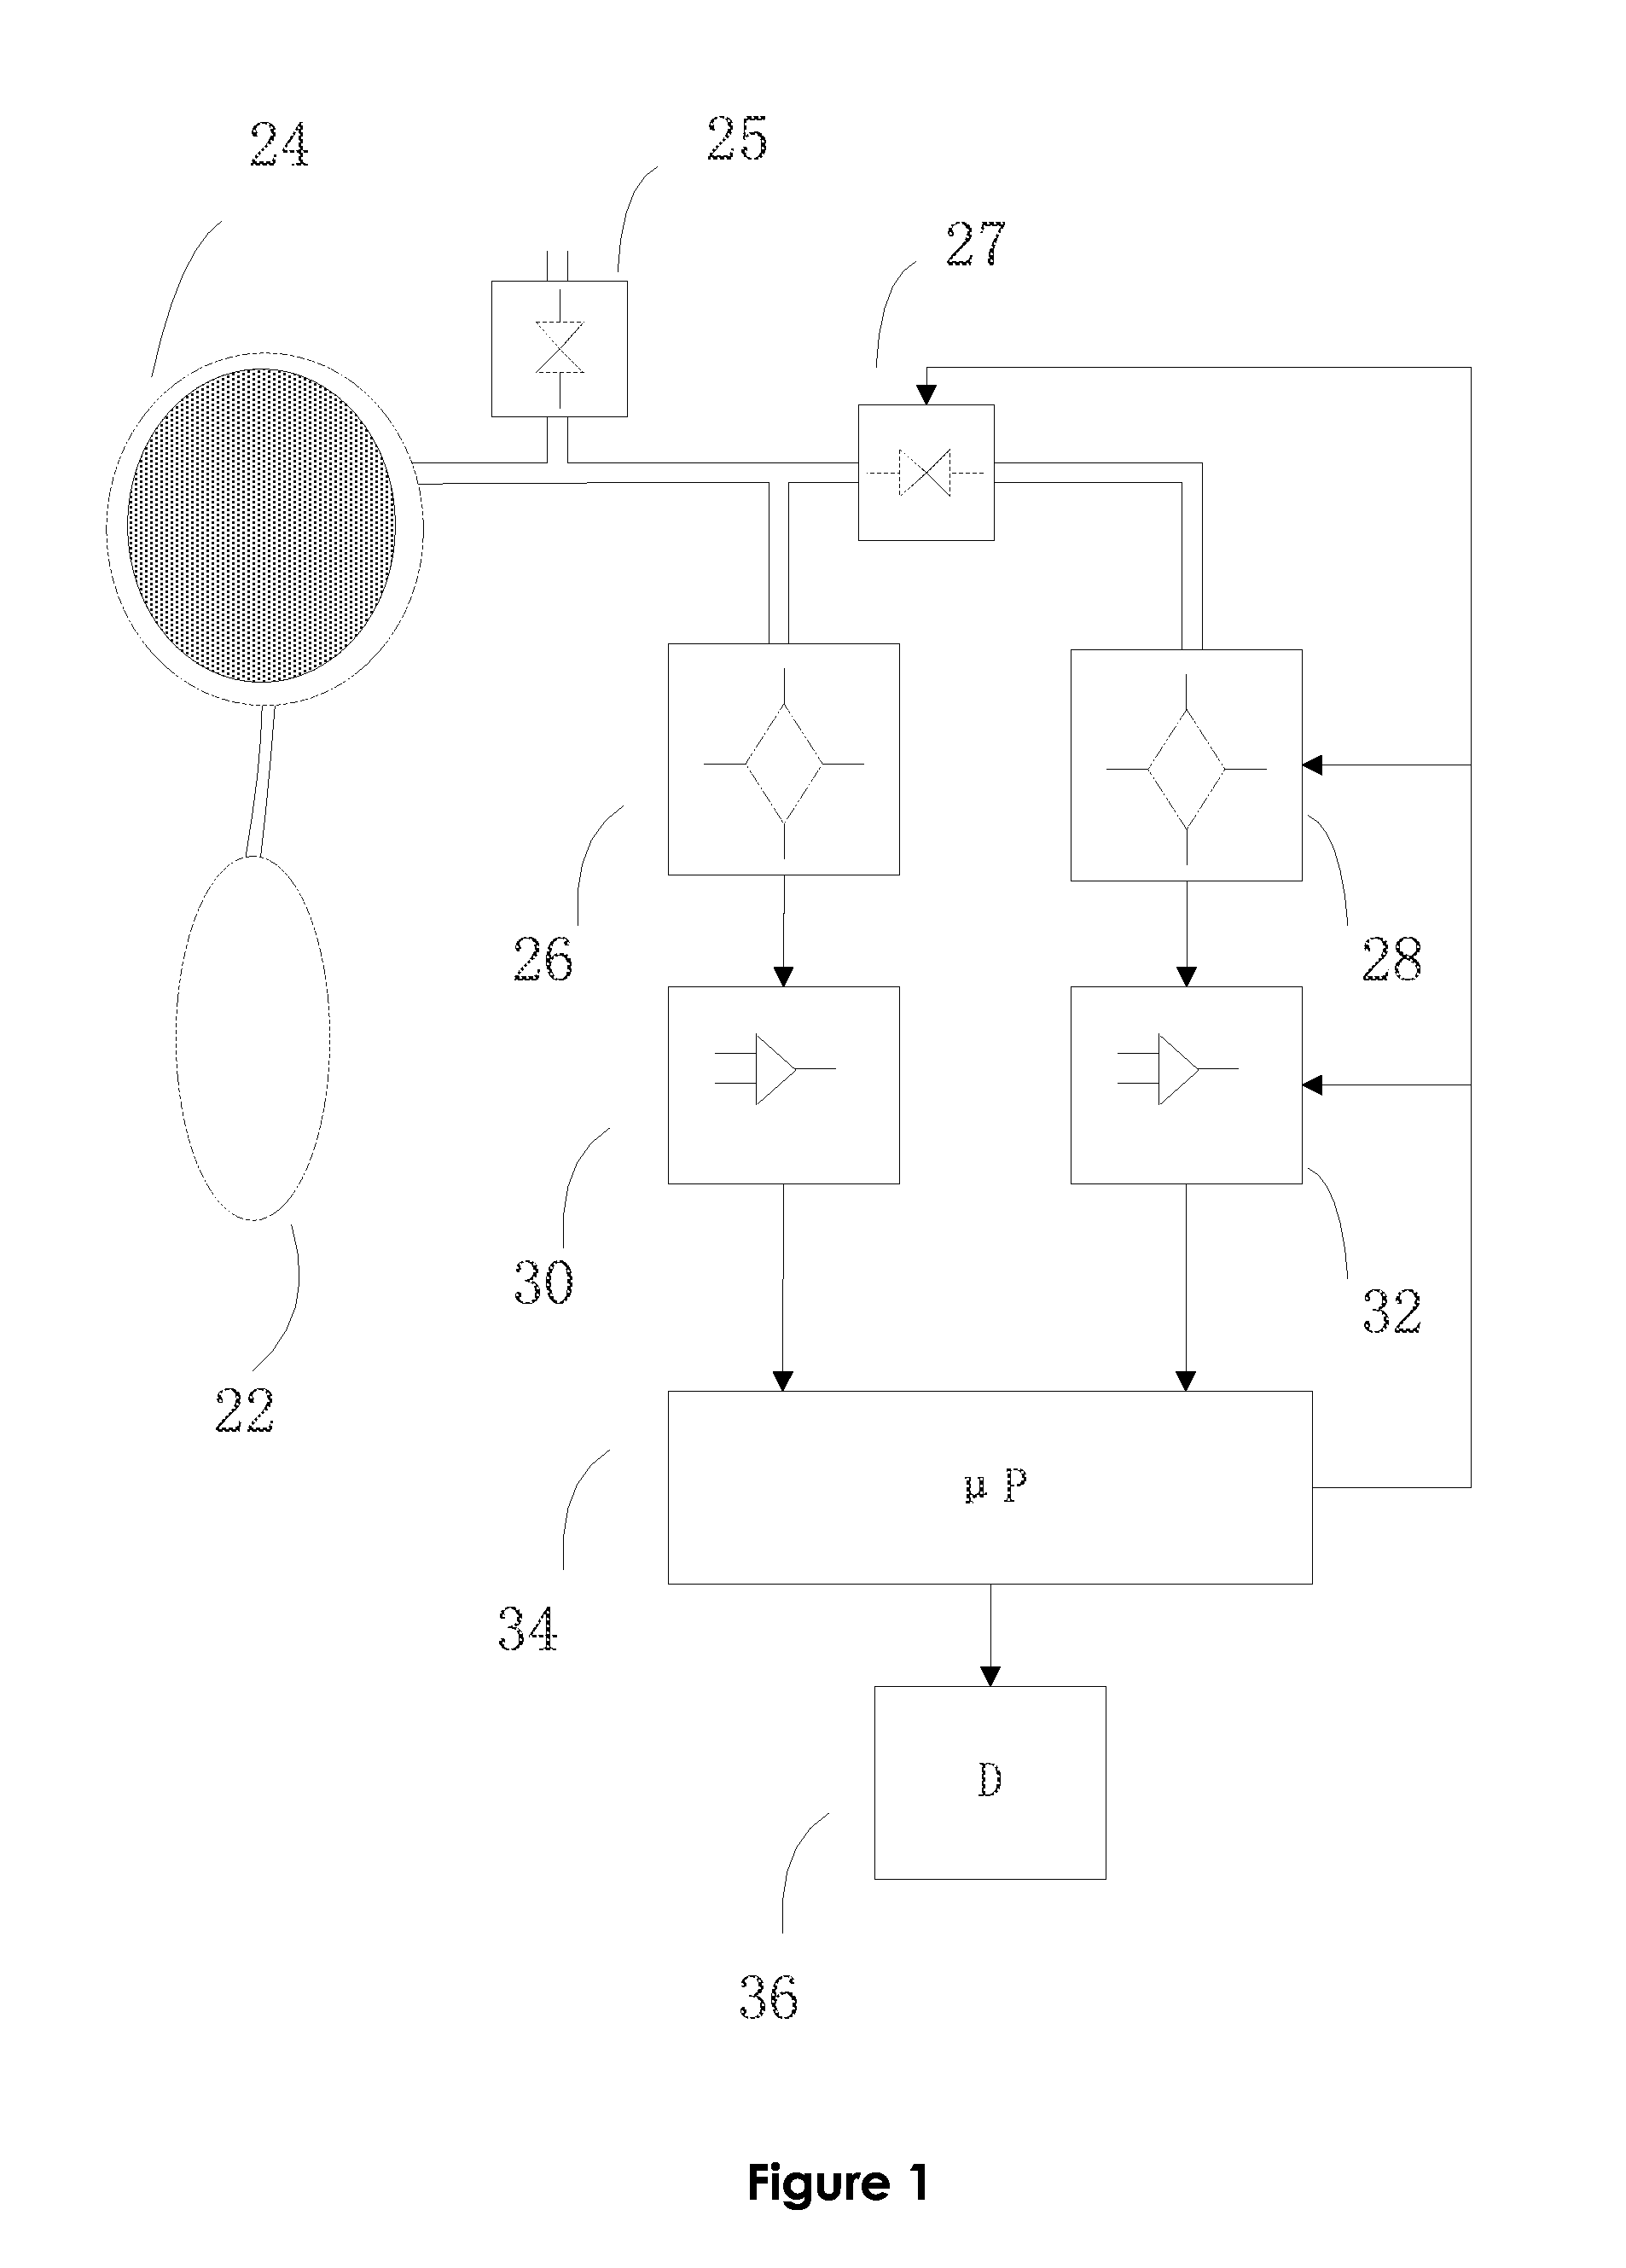 Method for automatic error detection in pressure measurement and an electronic sphygmomanometer